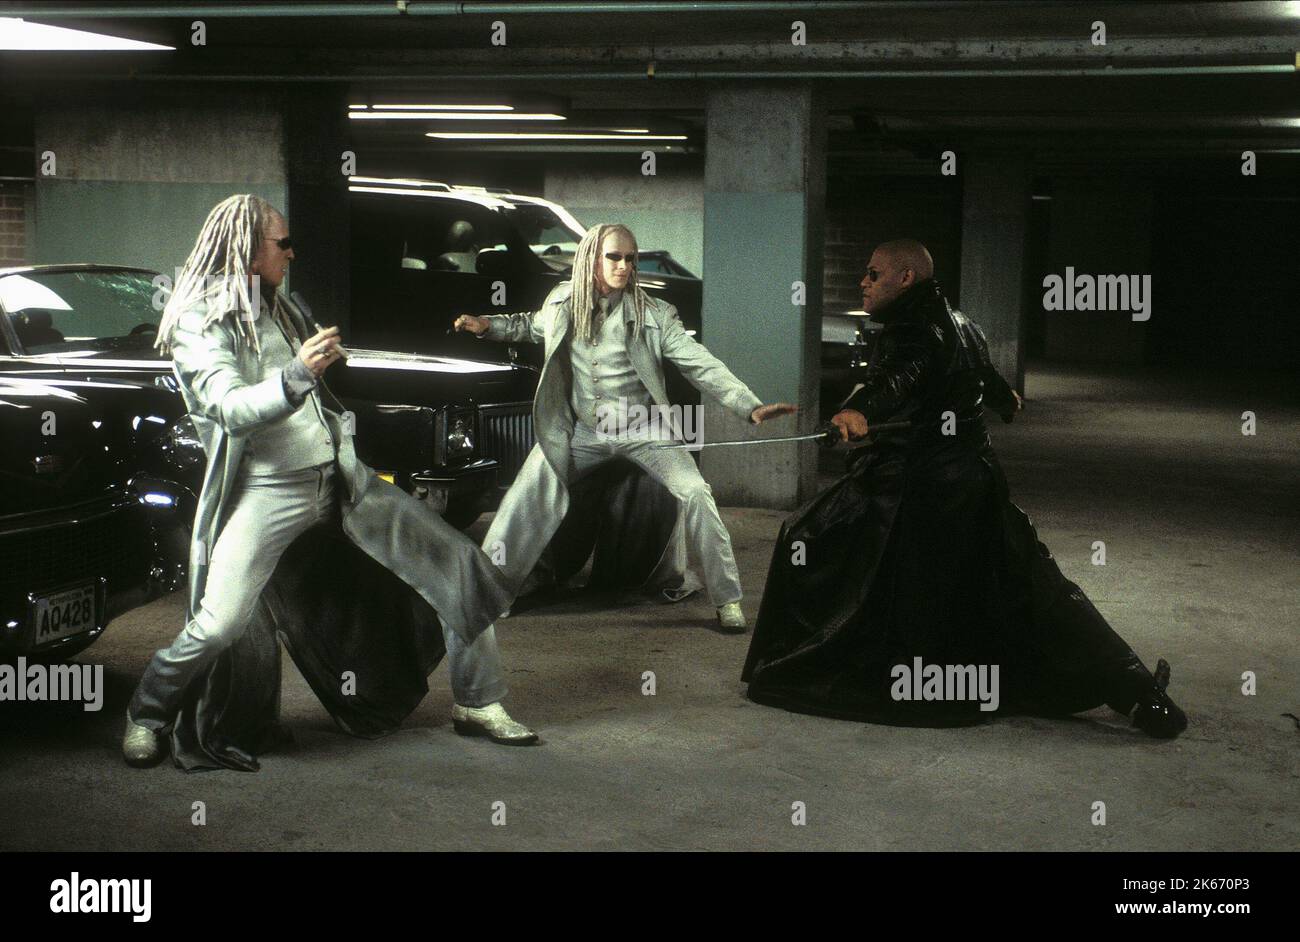 NEIL RAYMENT, ADRIAN RAYMENT, LAURENCE FISHBURNE, THE MATRIX RELOADED, 2003 Stock Photo